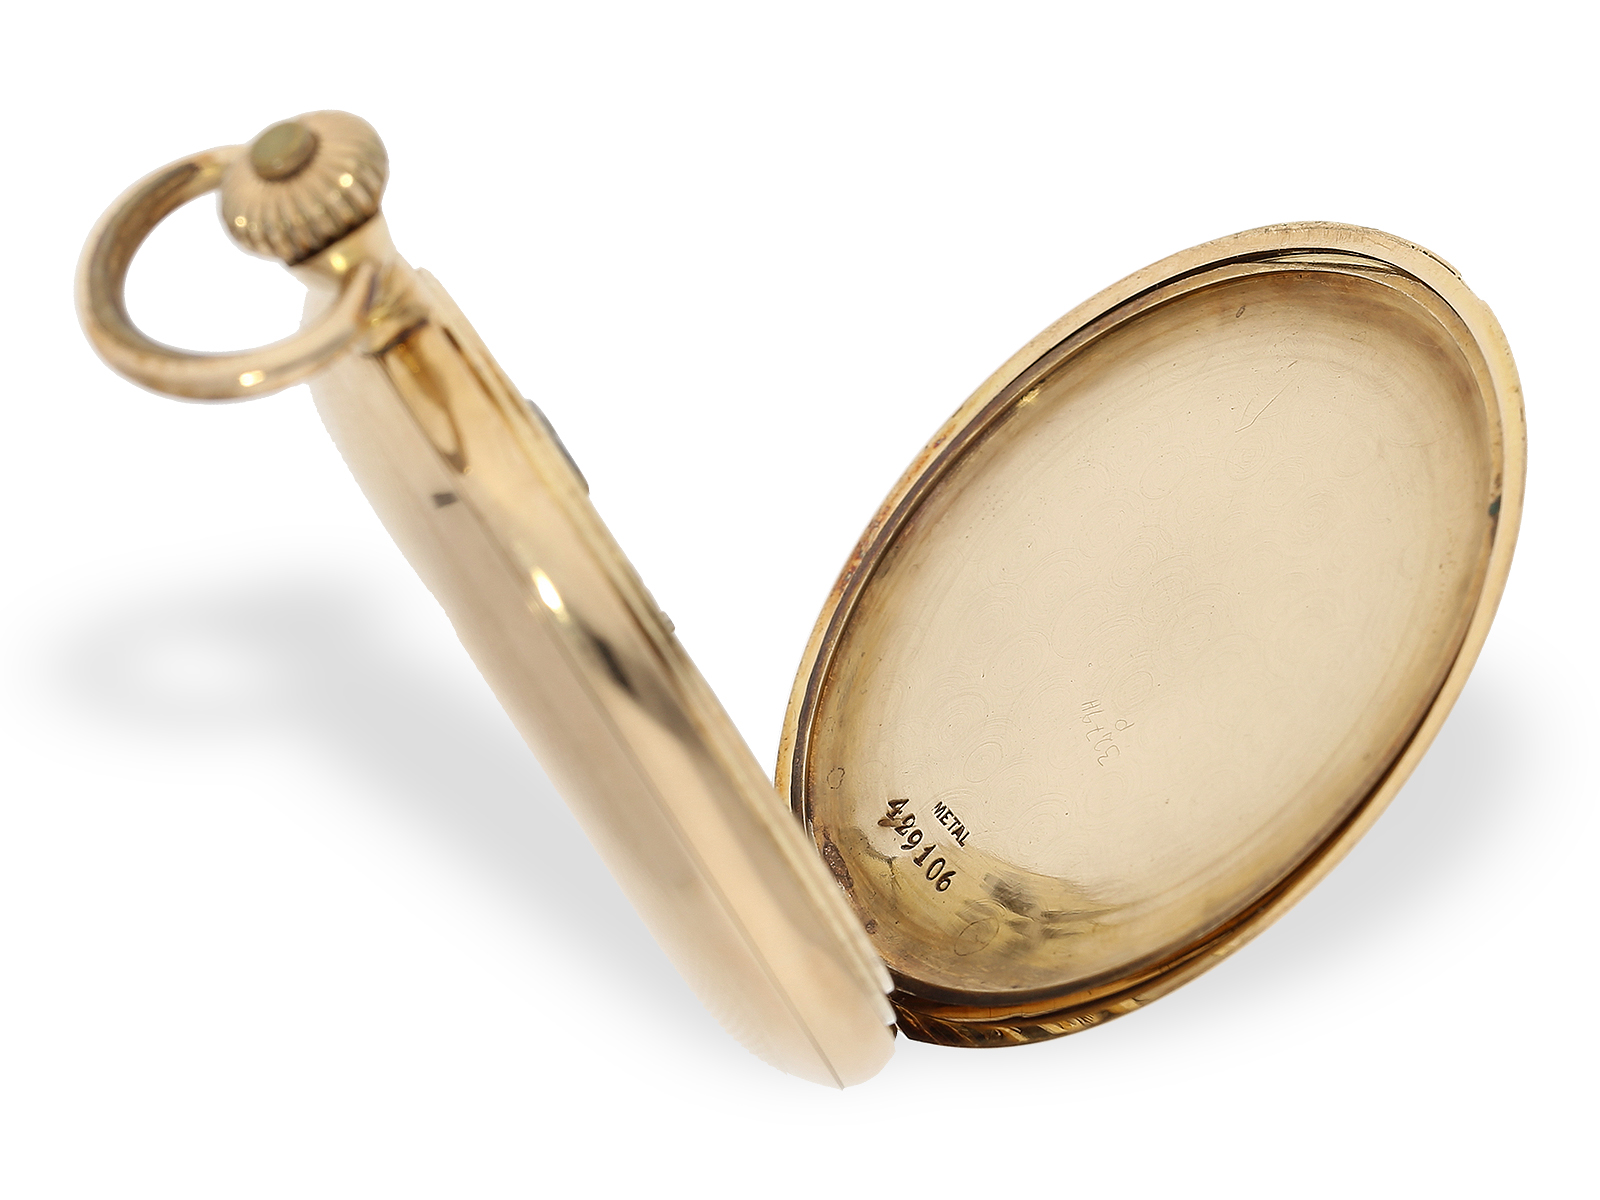 Pocket watch: fine gold hunting case watch, signed Girard Perregaux No. 429106, ca. 1910 - Image 3 of 7